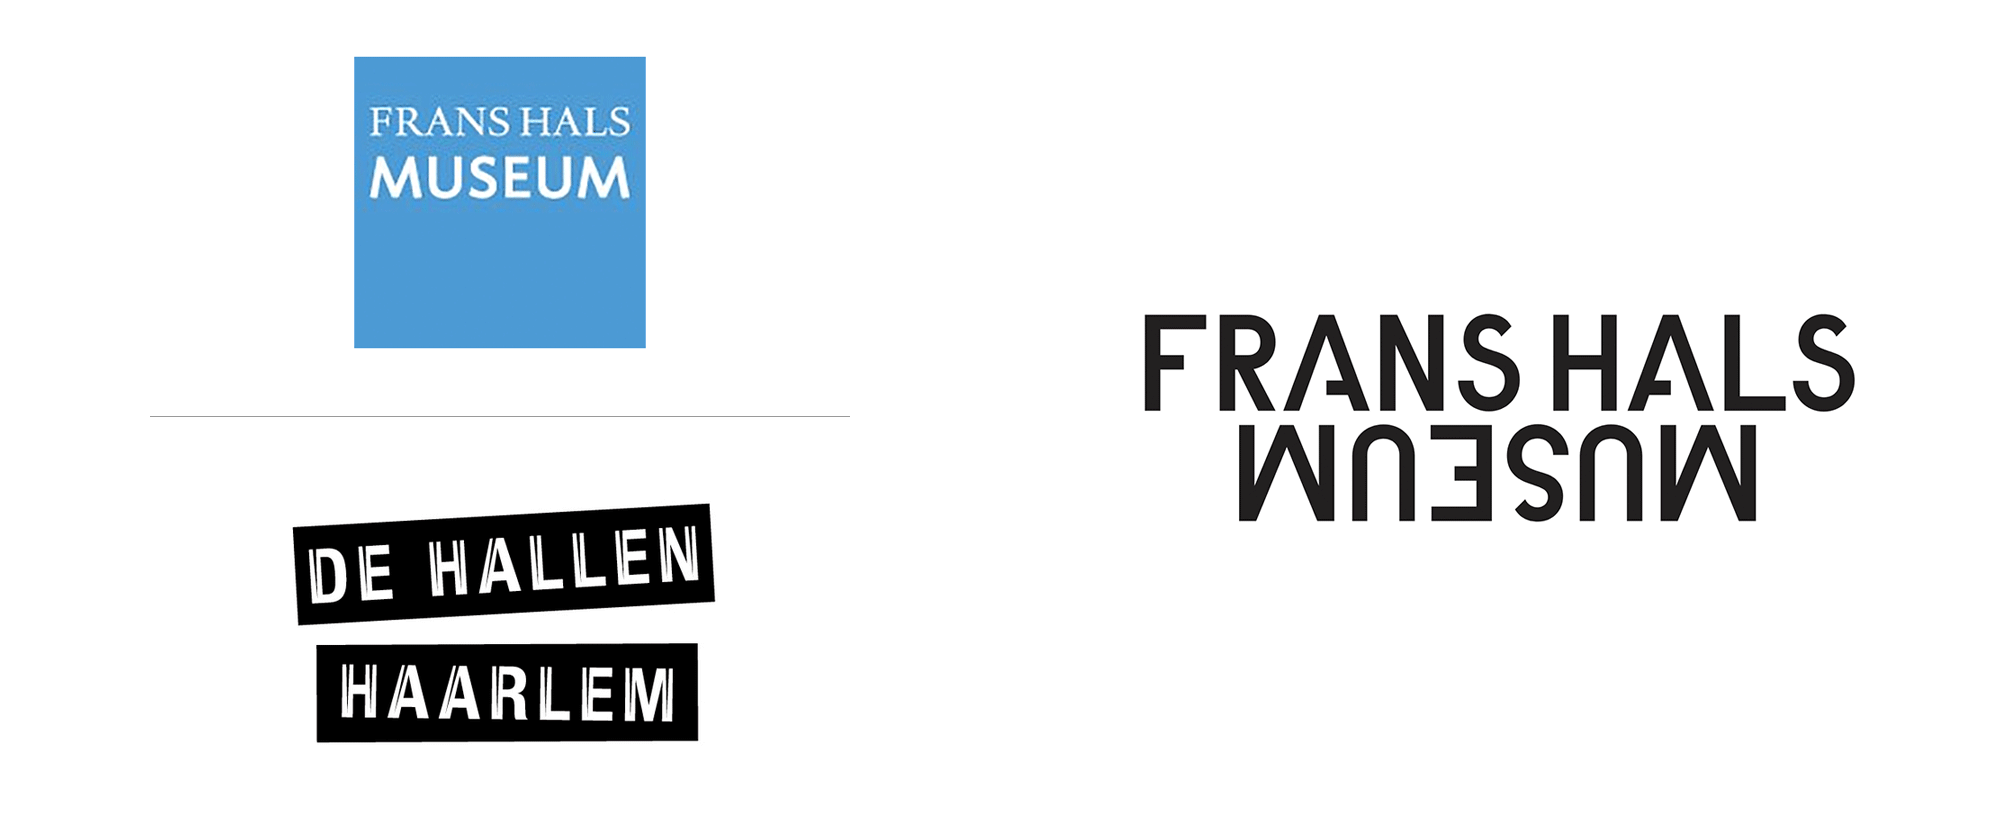 Museum Logo - Brand New: New Logo and Identity for Frans Hals Museum by KesselsKramer